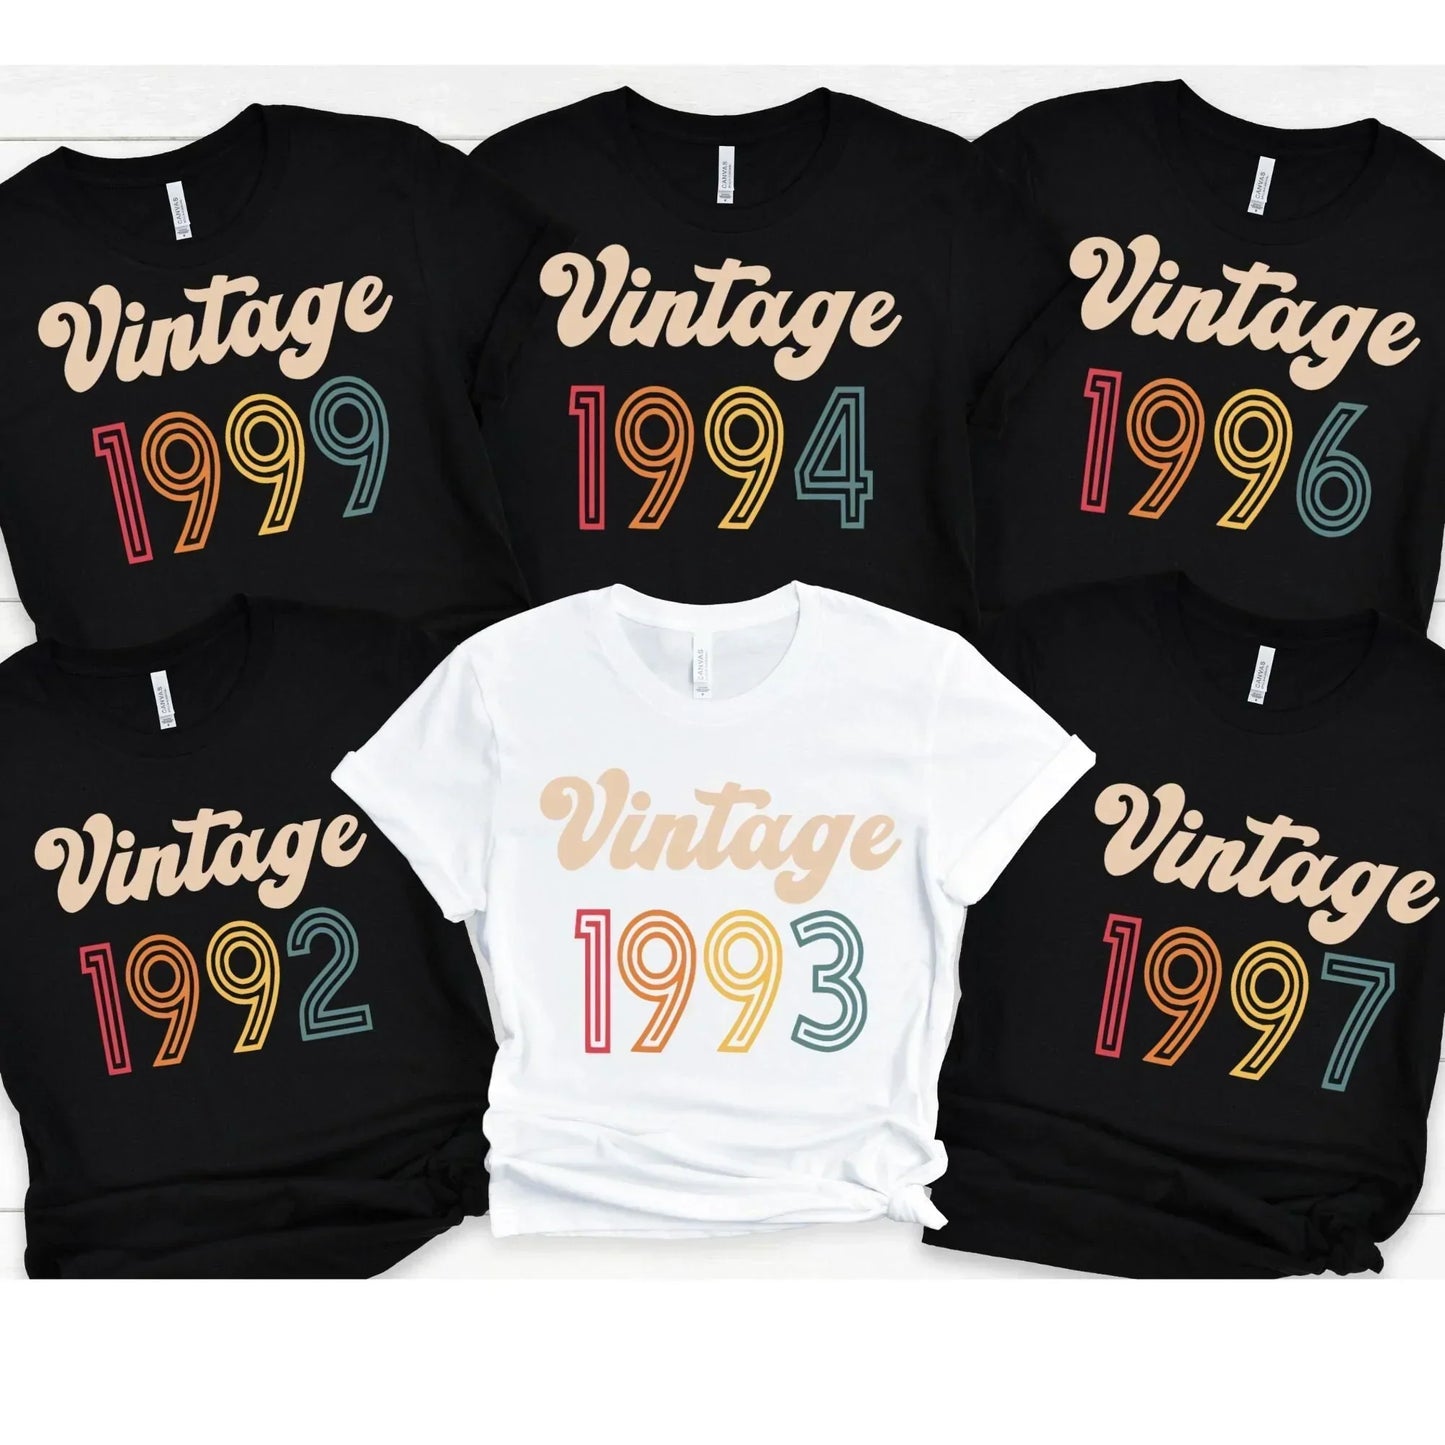 Vintage Birthday Shirts, Great for 90s babies, 30th Birthday T-shirt or 25th, 26th, 27th, 28th, 29th Birthday Gift for Party Celebration HMDesignStudioUS